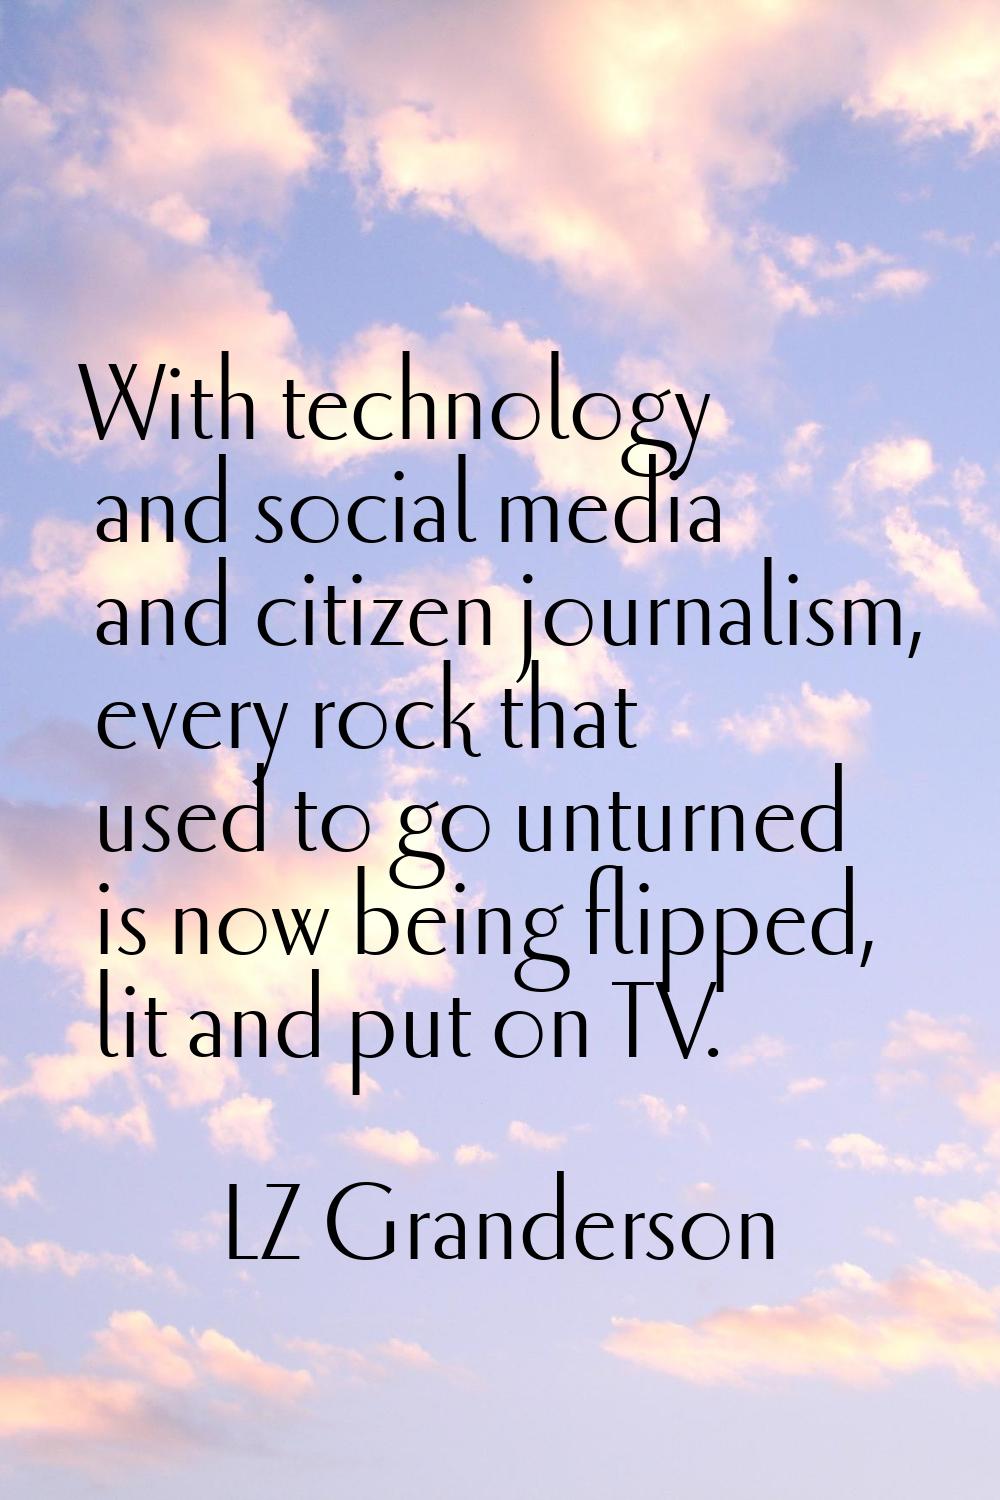 With technology and social media and citizen journalism, every rock that used to go unturned is now